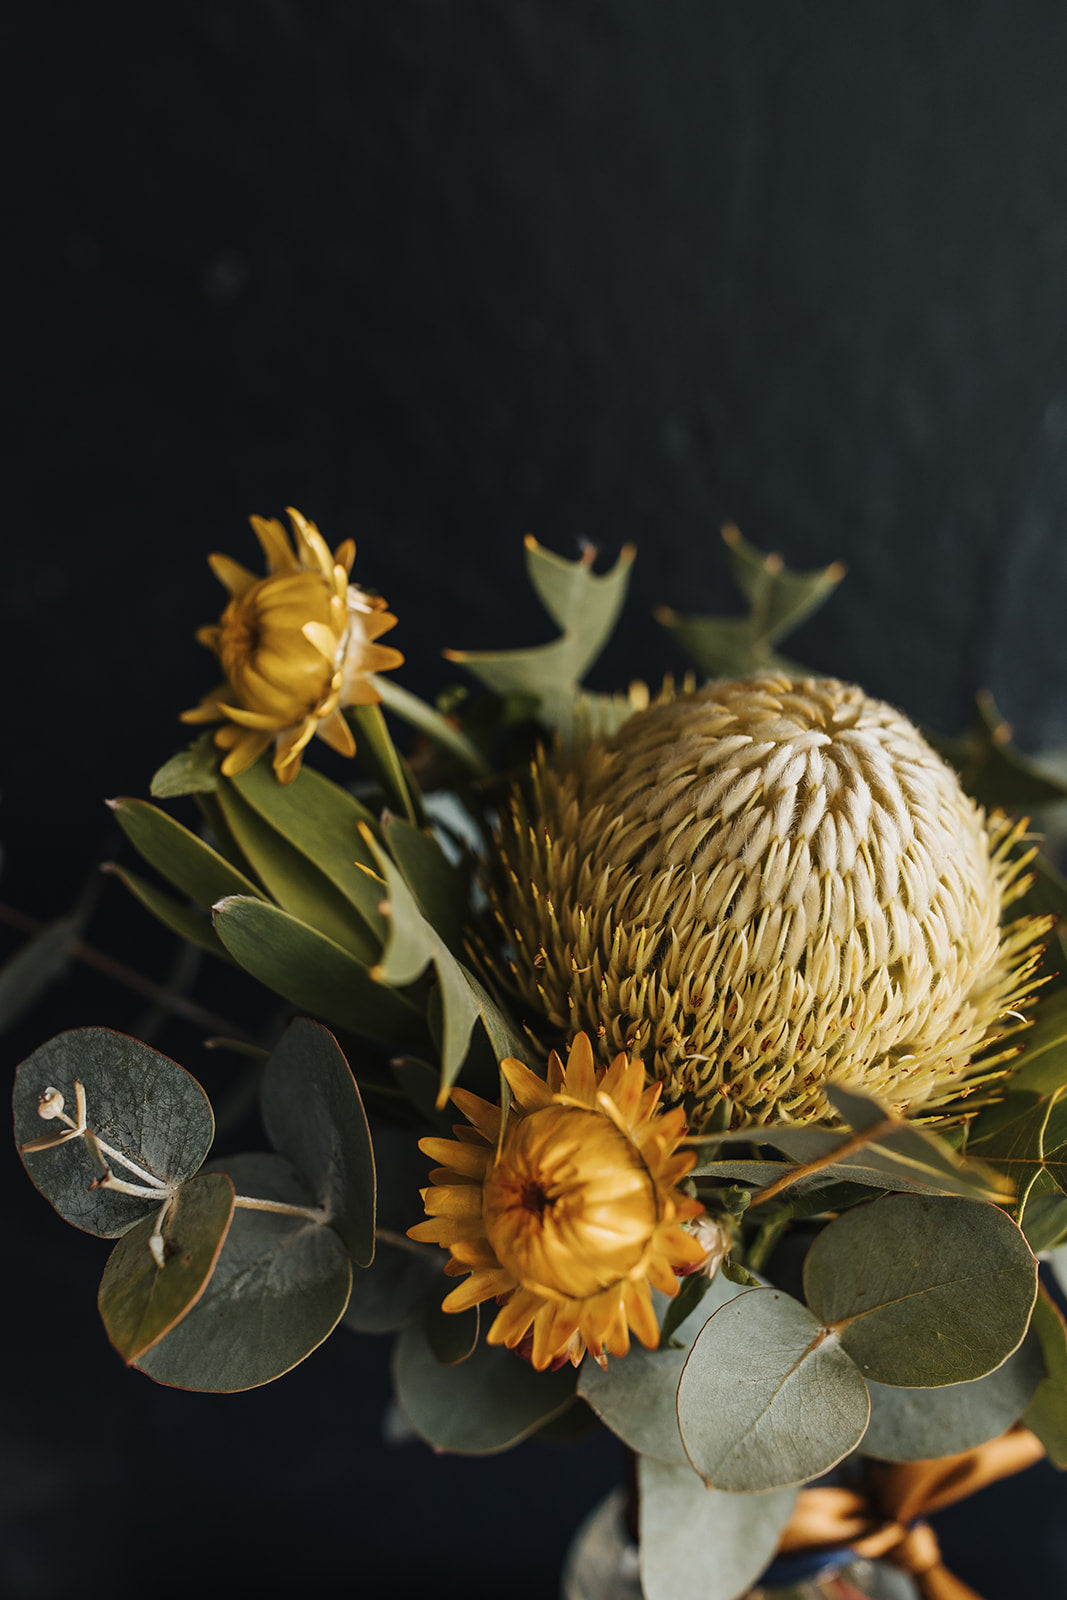 A close up of a banksia flower with green leucadendrons, straw flowers and blue gum.